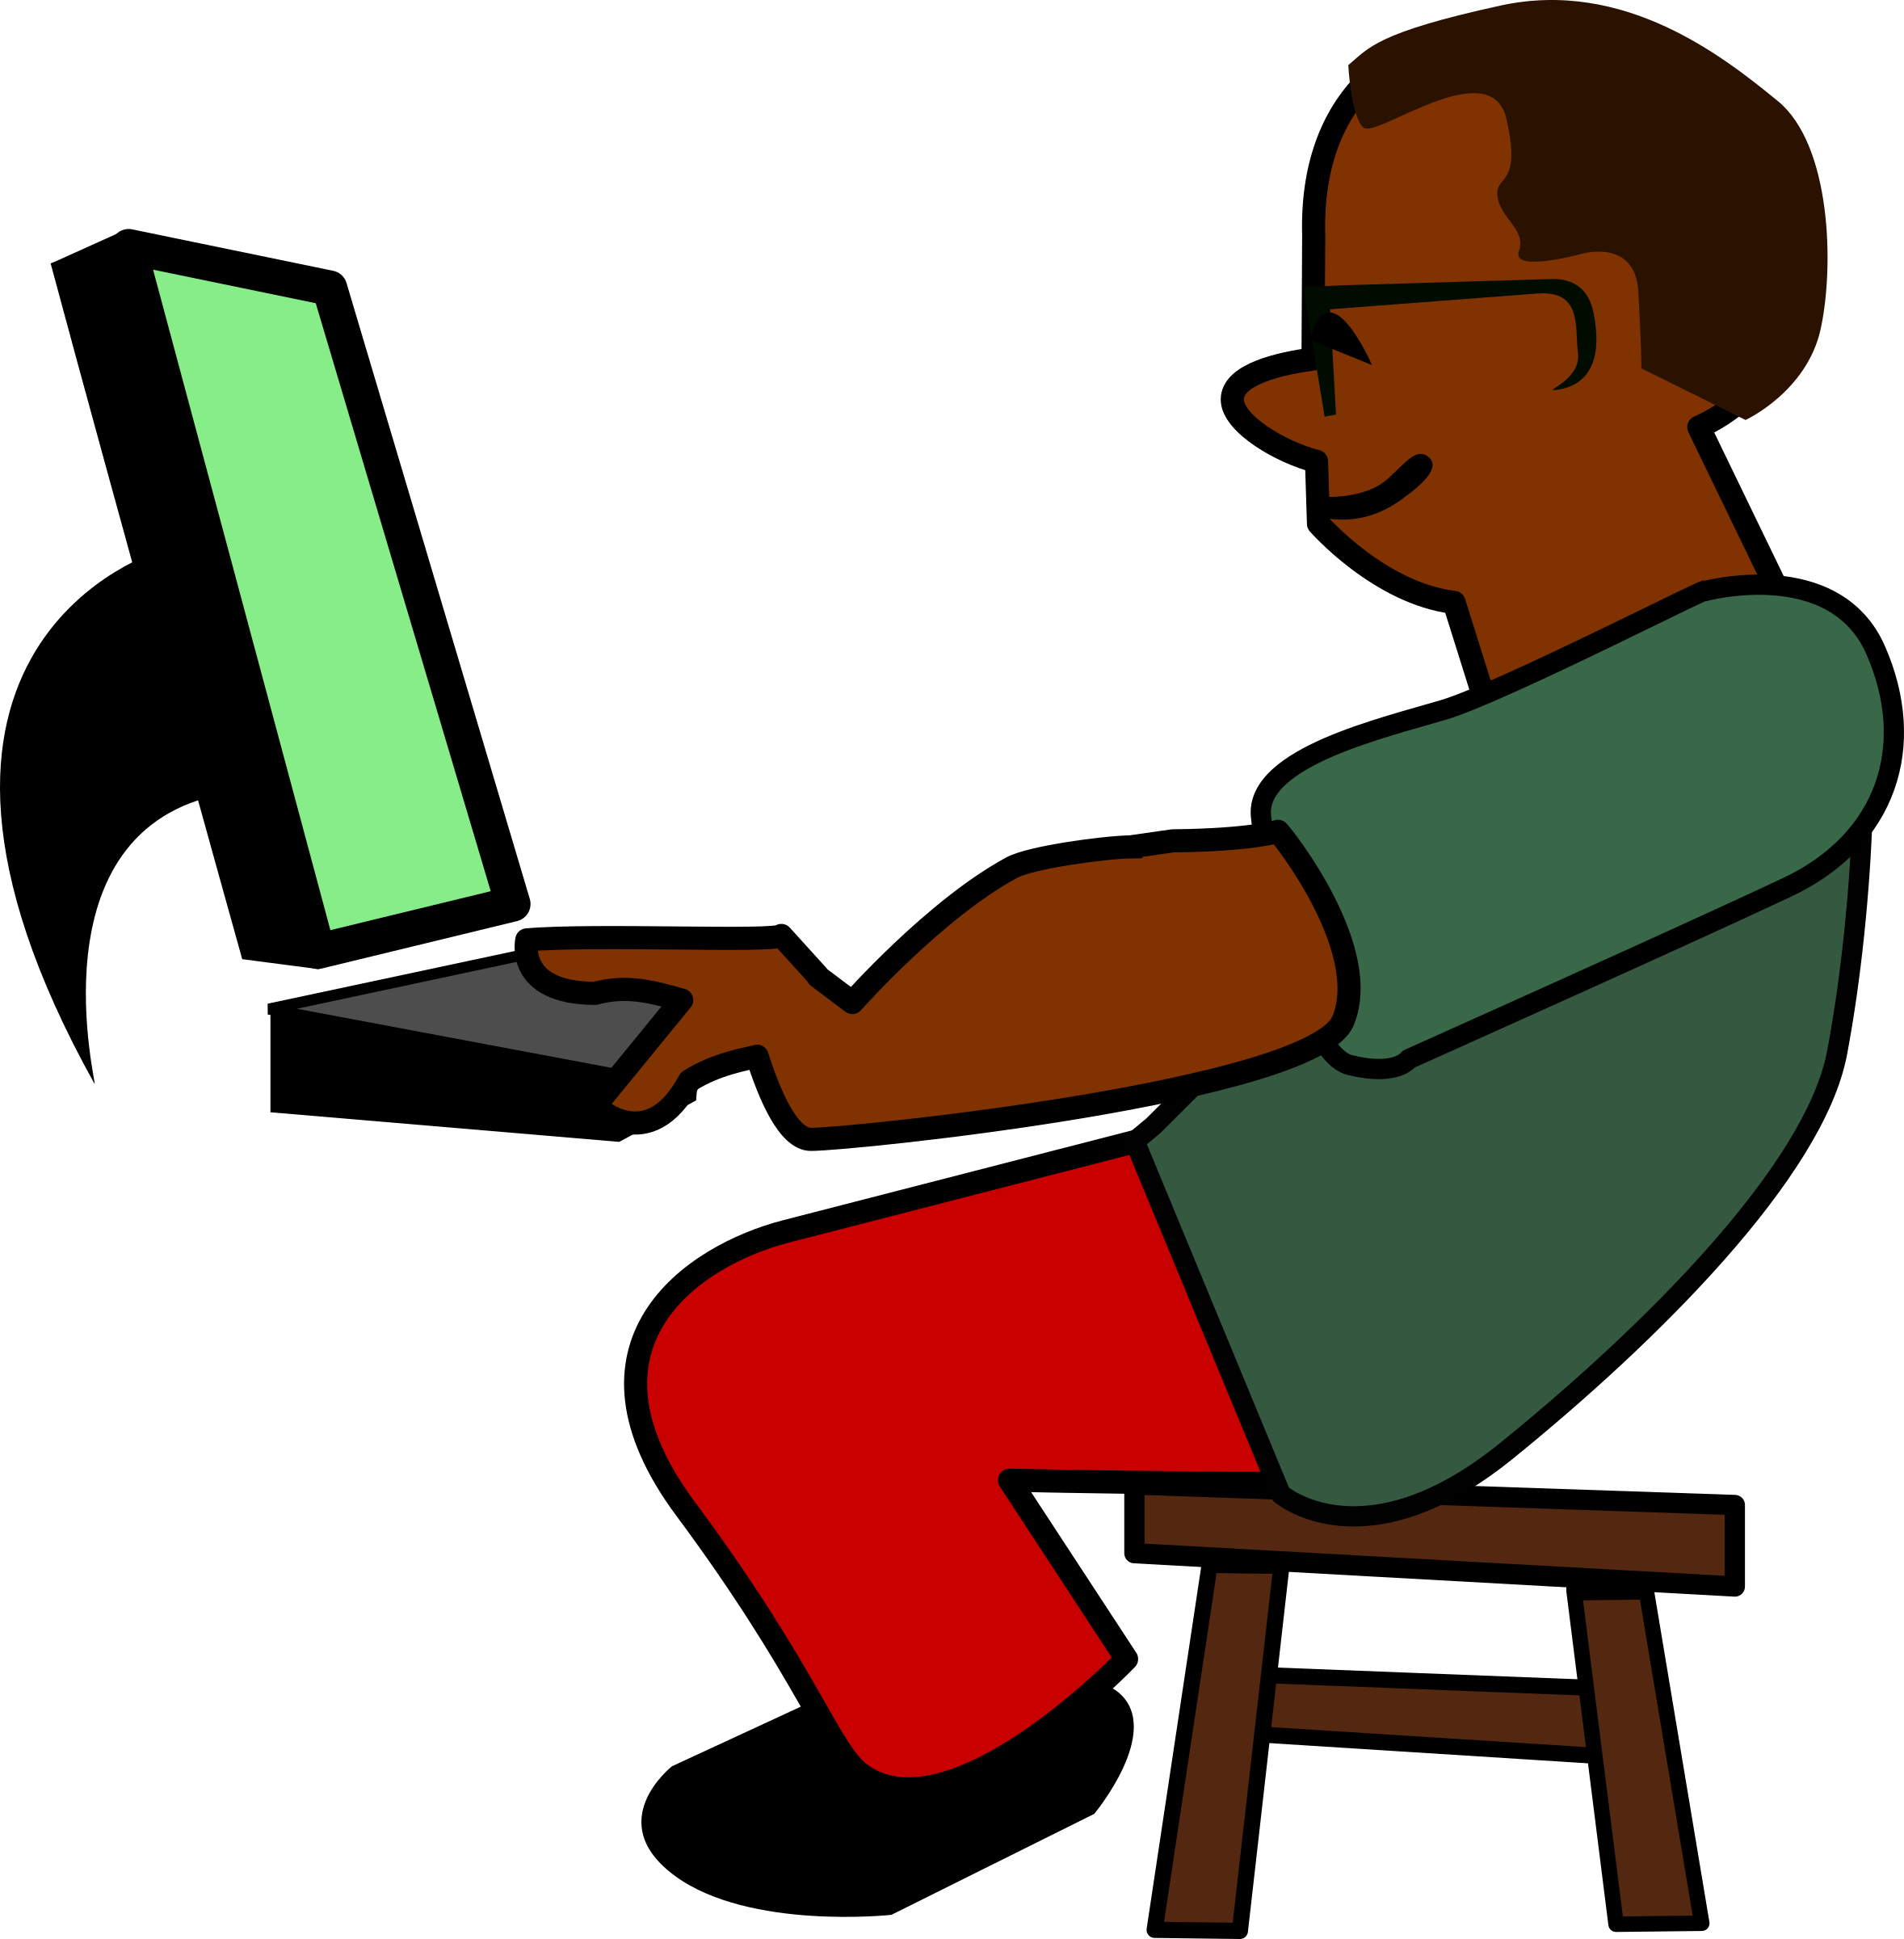 A Cartoon Of A Man Sitting On A Stool Using A Laptop